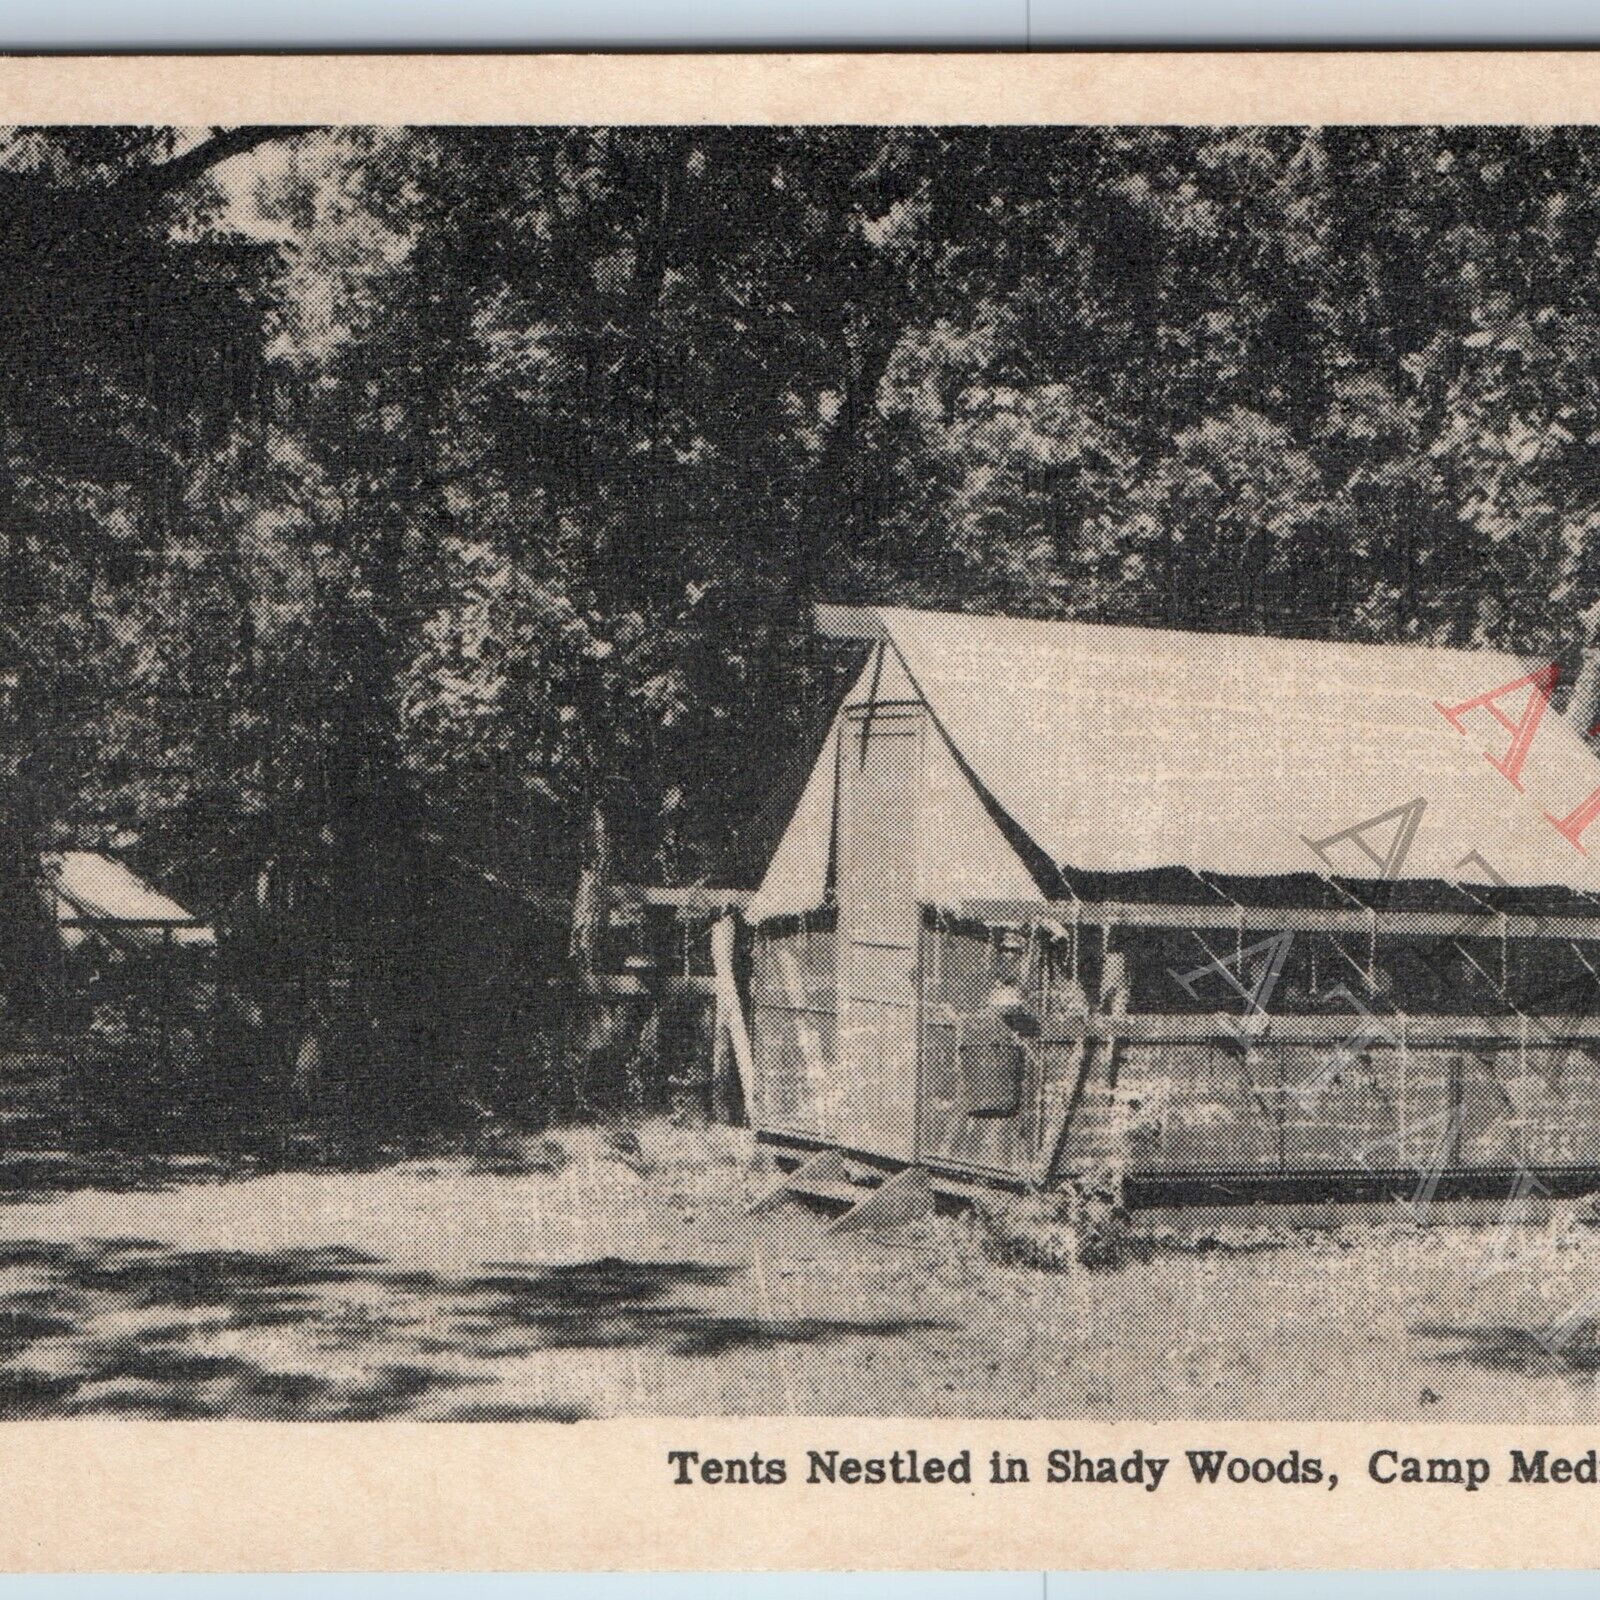 c1940s Stillman Valley IL Girl Scout Camp Medill McCormick Cabin Tent Woods A192